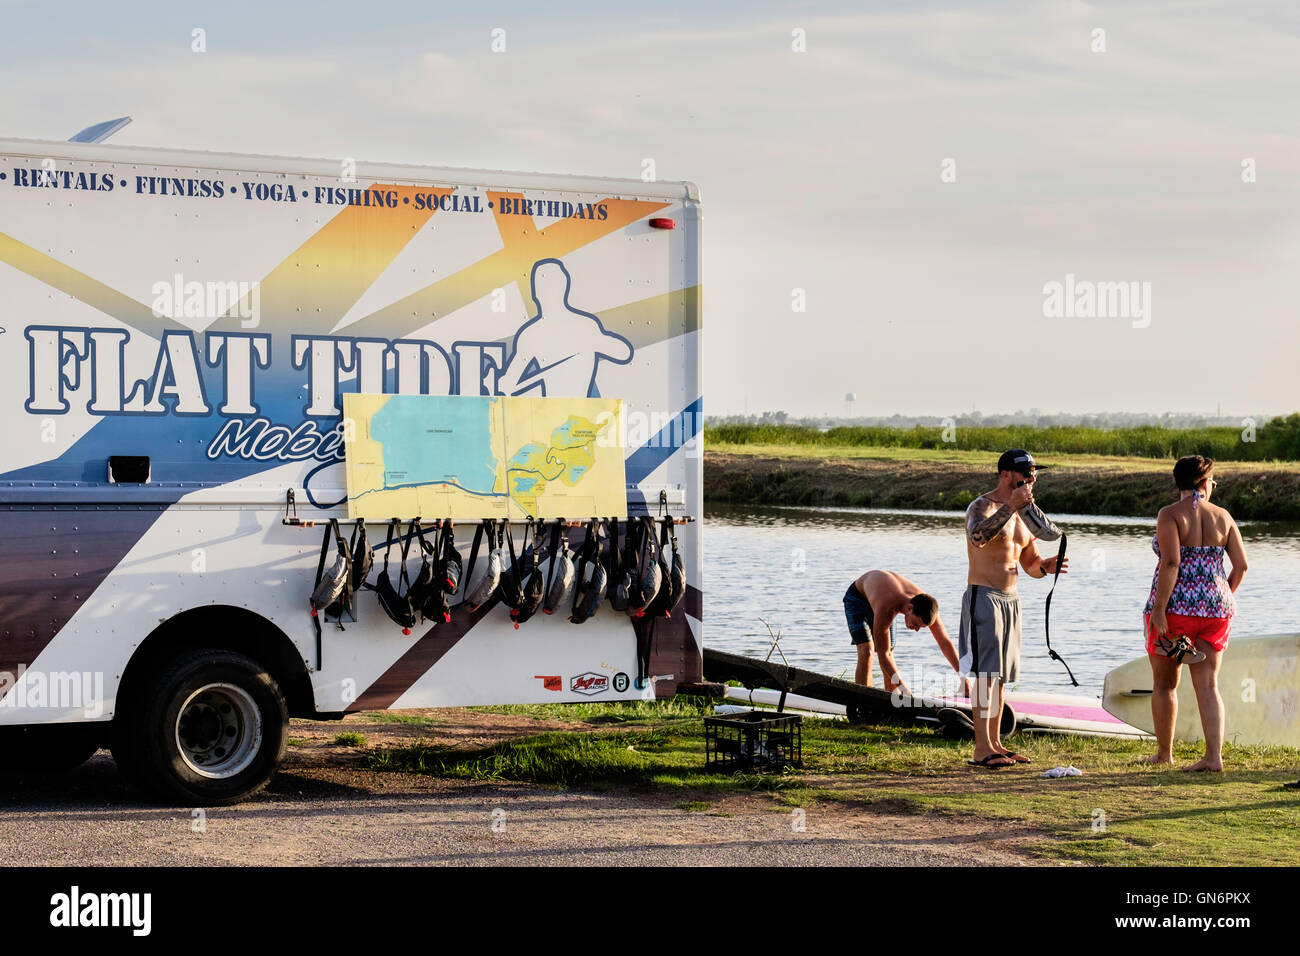 A truck renting watercraft is parked next to the North Canadian river in Oklahoma City, Oklahoma, USA. Stock Photo